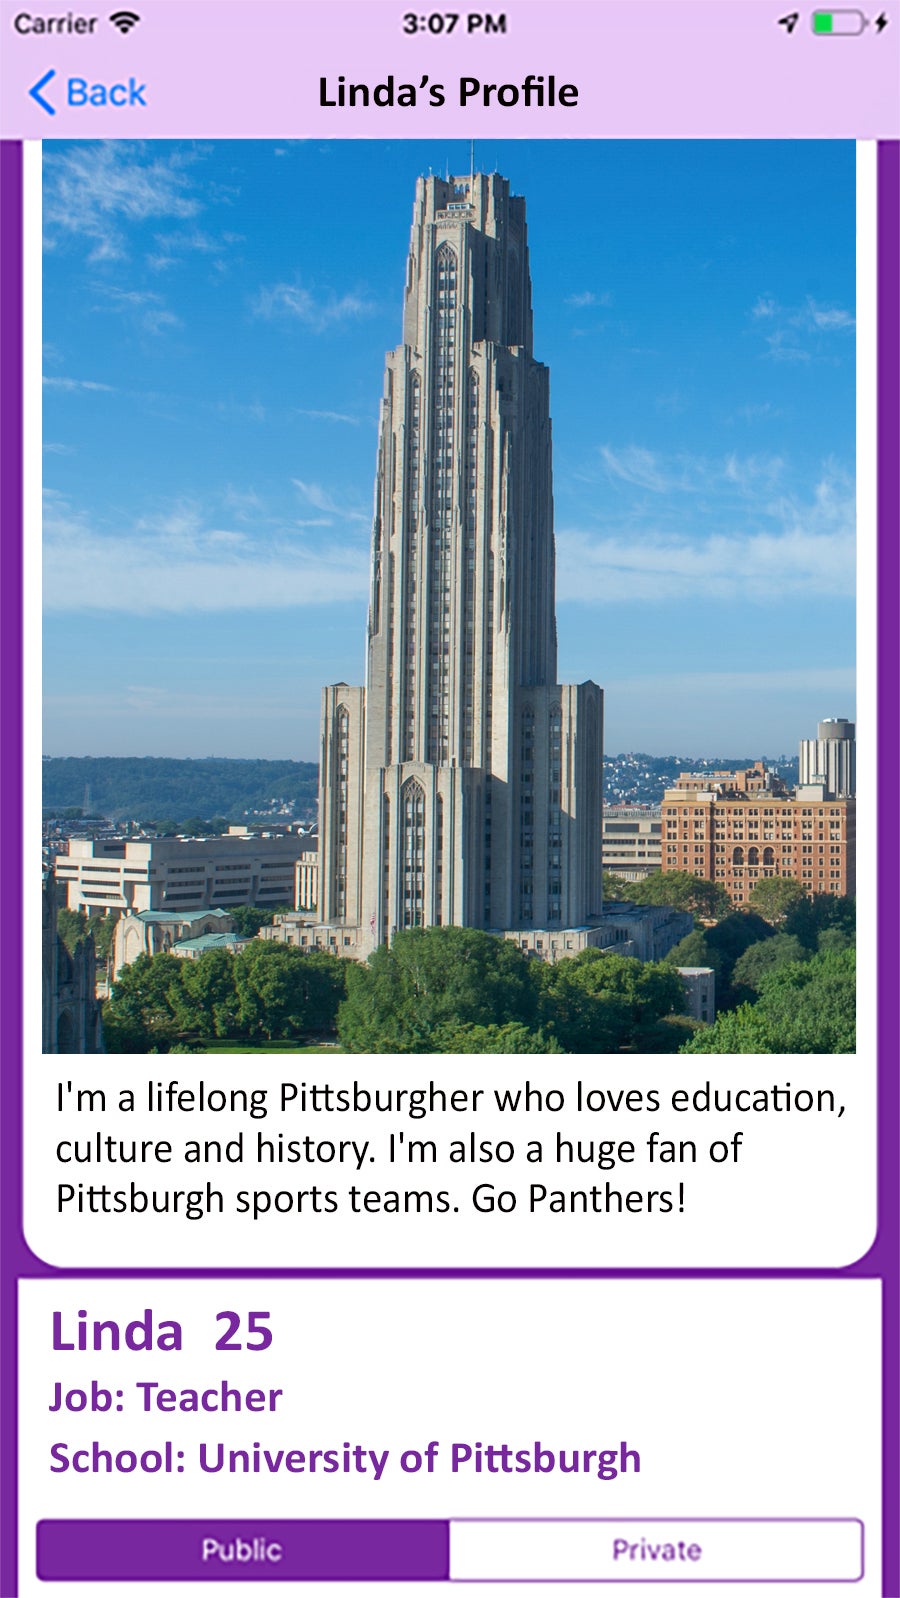 a photo of the Cathedral inserted to a mock profile of Linda, 25, who's a teacher at Pitt